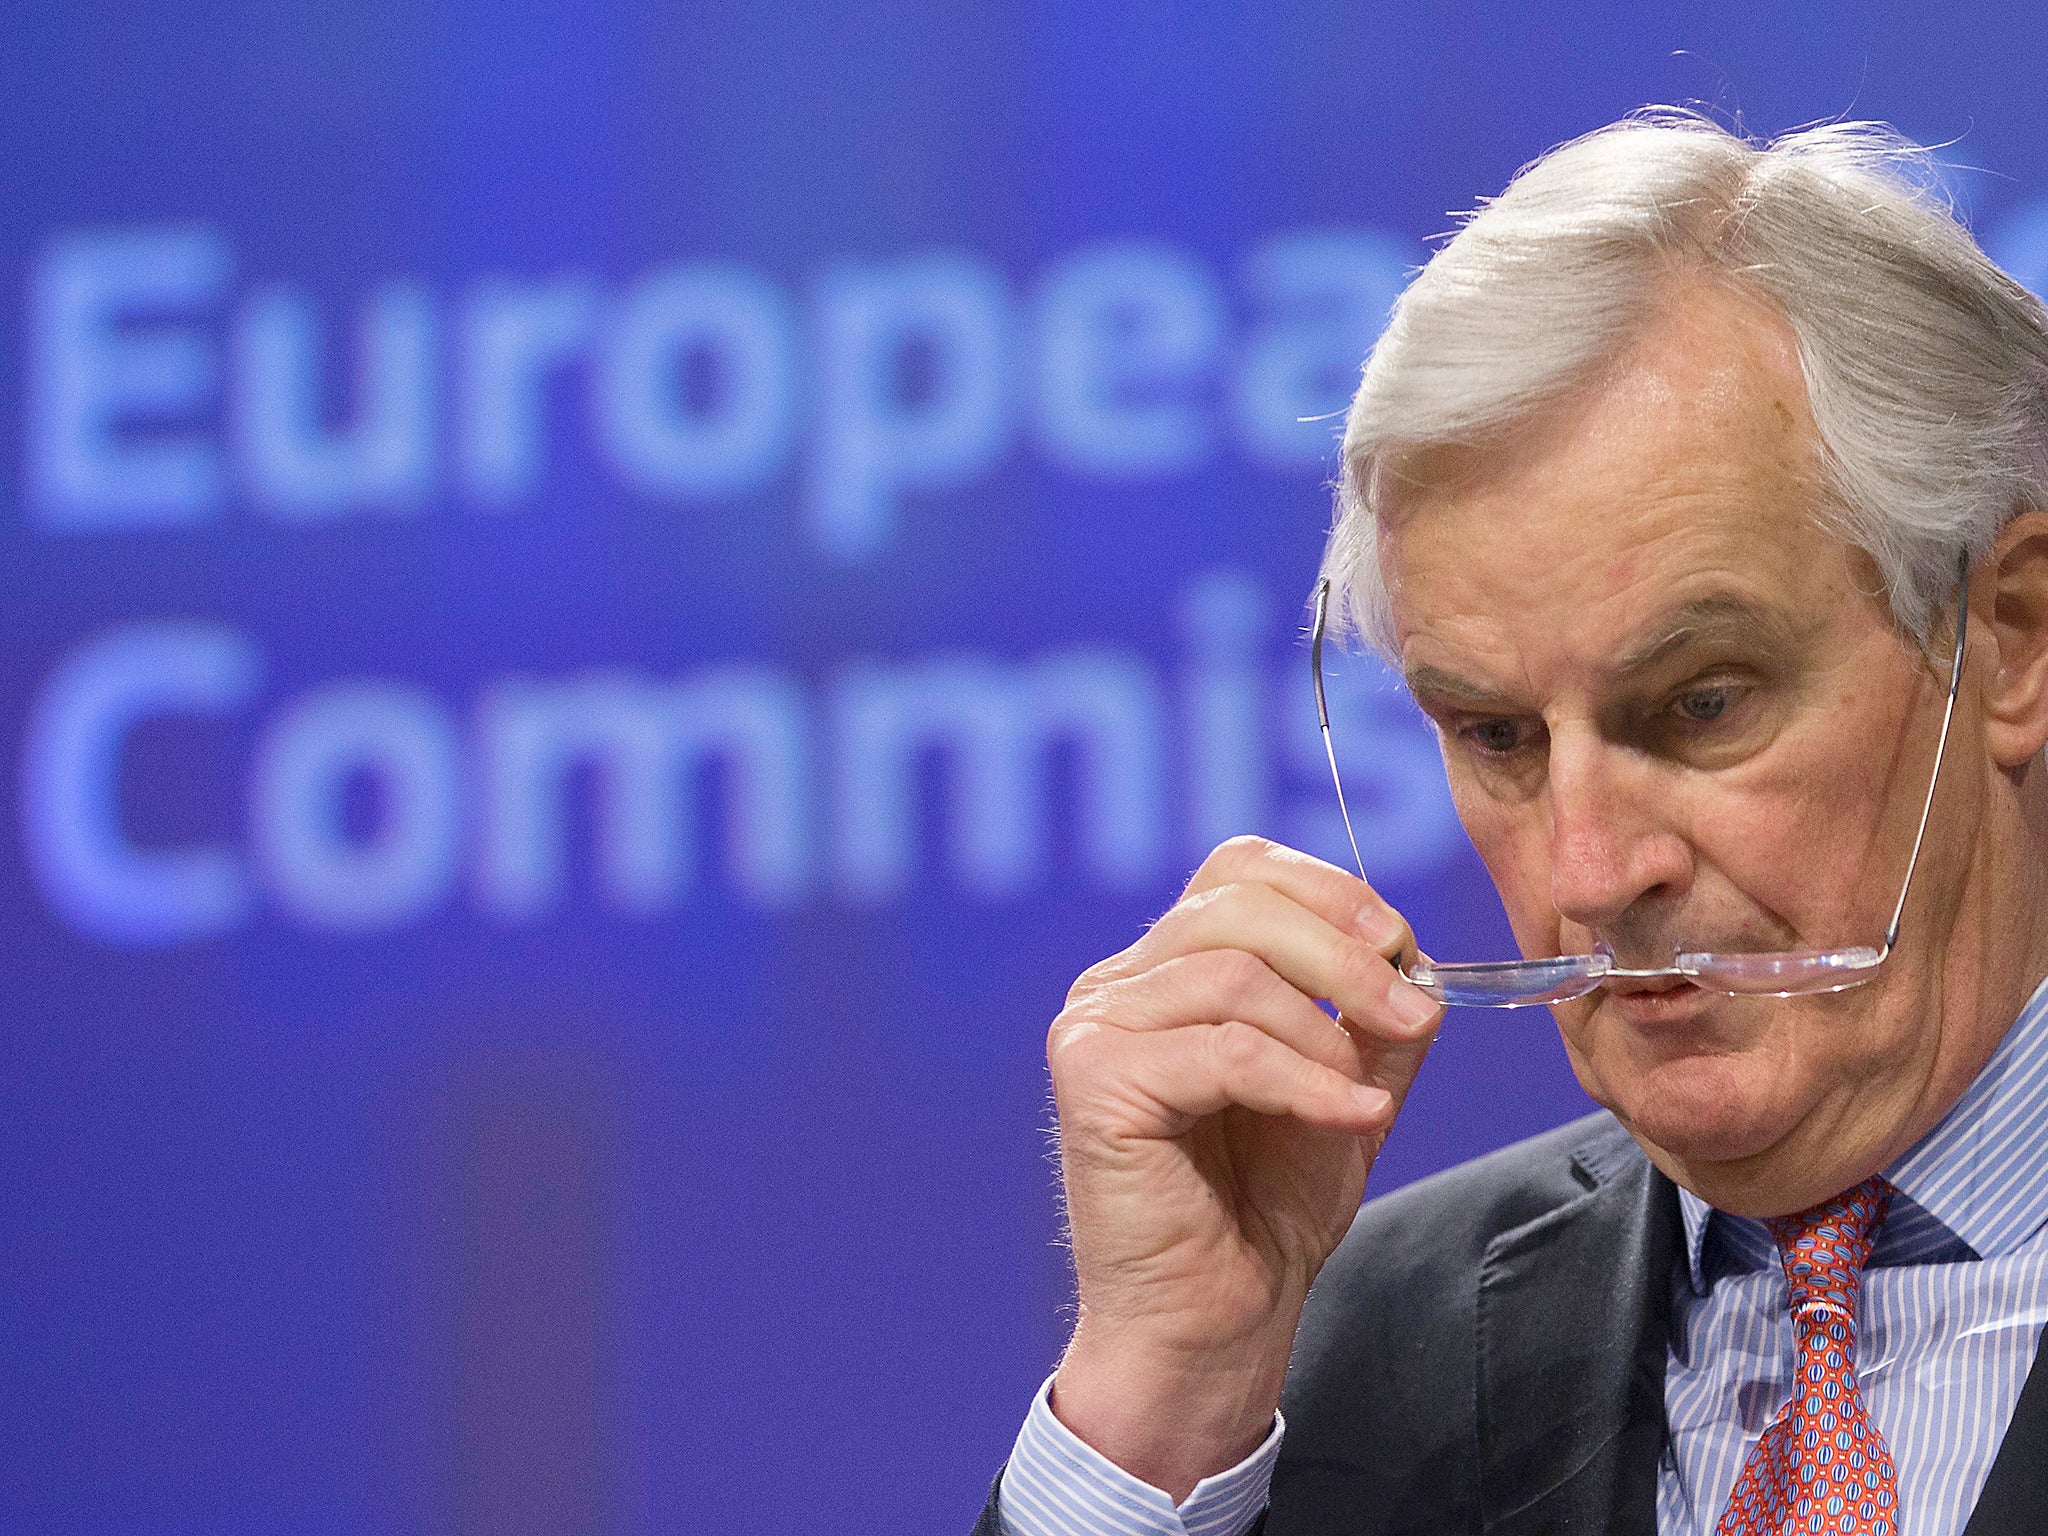 Michel Barnier, European Chief Negotiator: The European Commission's view on trade agreements has been overturned by the European Court of Justice – with worrying consequences for any post-Brexit trade agreement with the UK